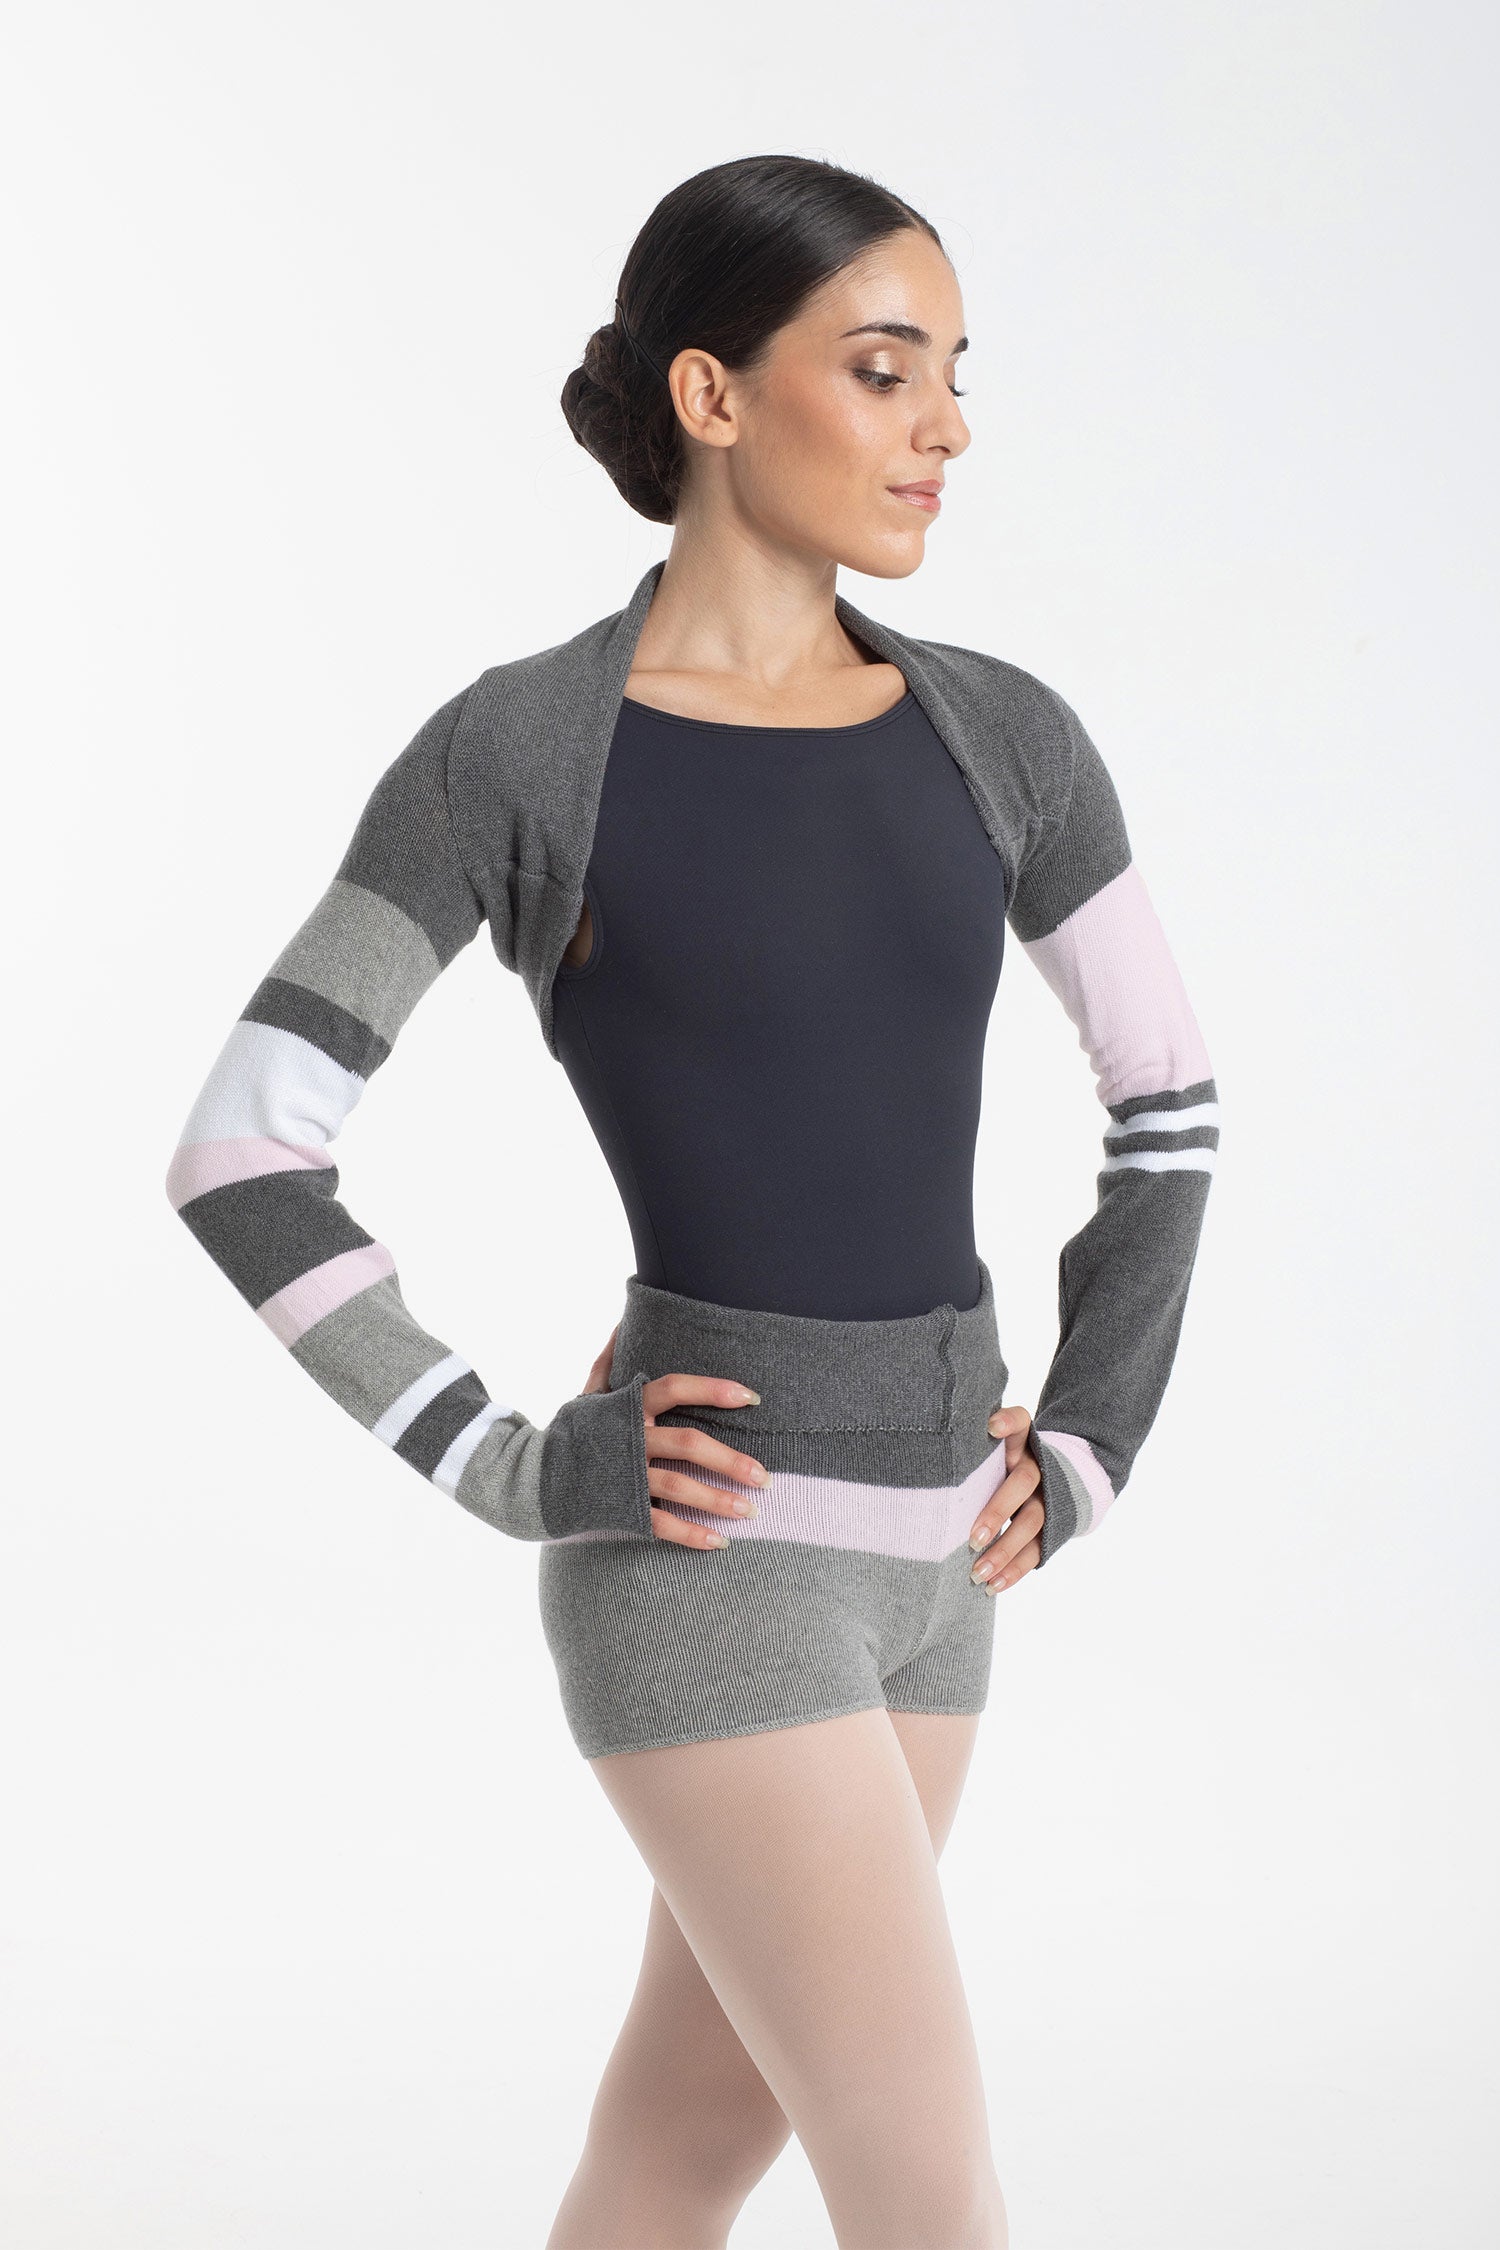 Intermezzo Mansurbi Knitted Warmup Shrug - Grey, Pink & White from The Collective Dancewear